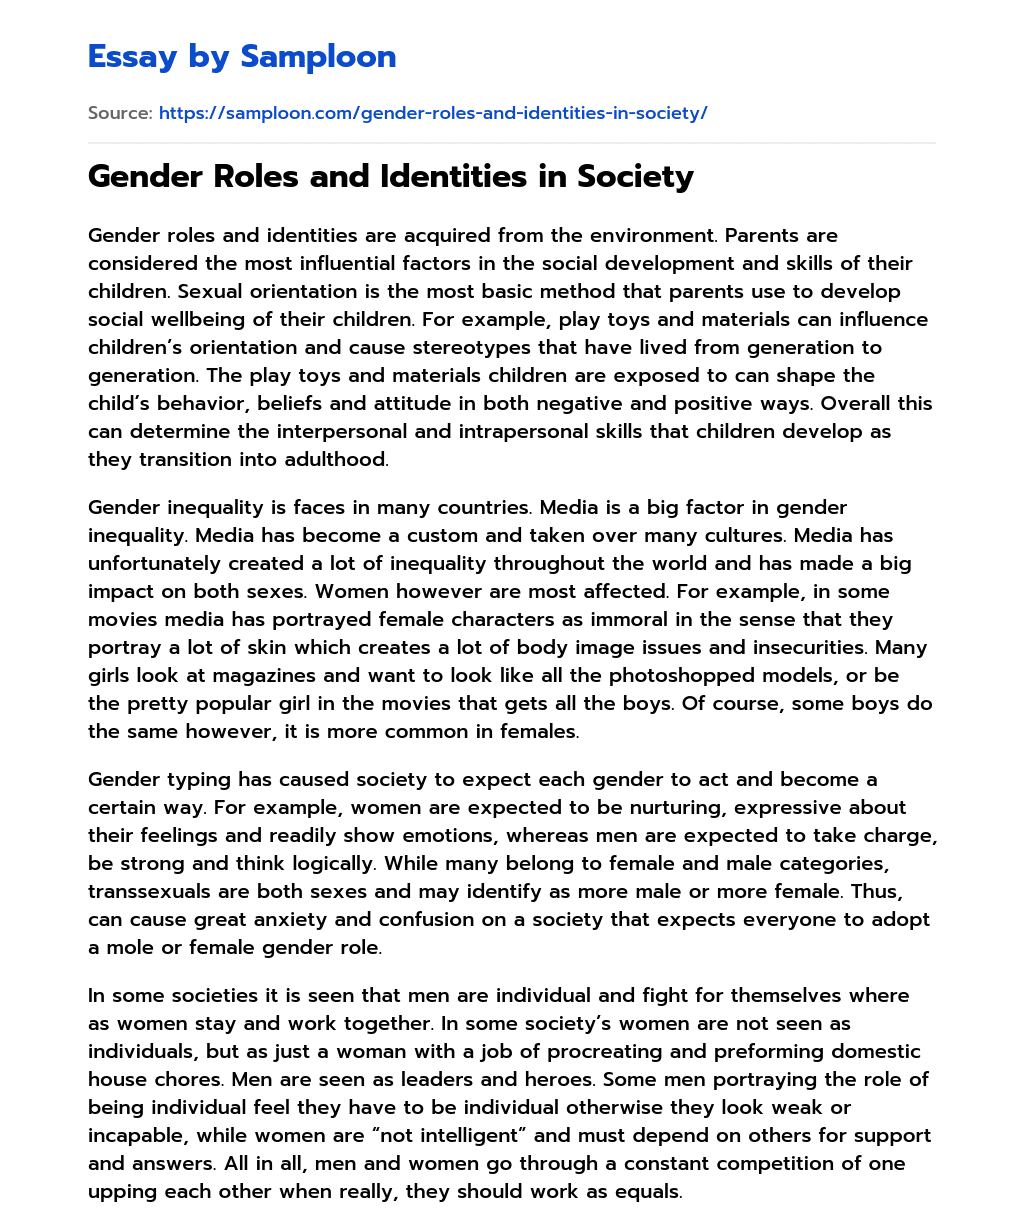 Gender Roles and Identities in Society essay